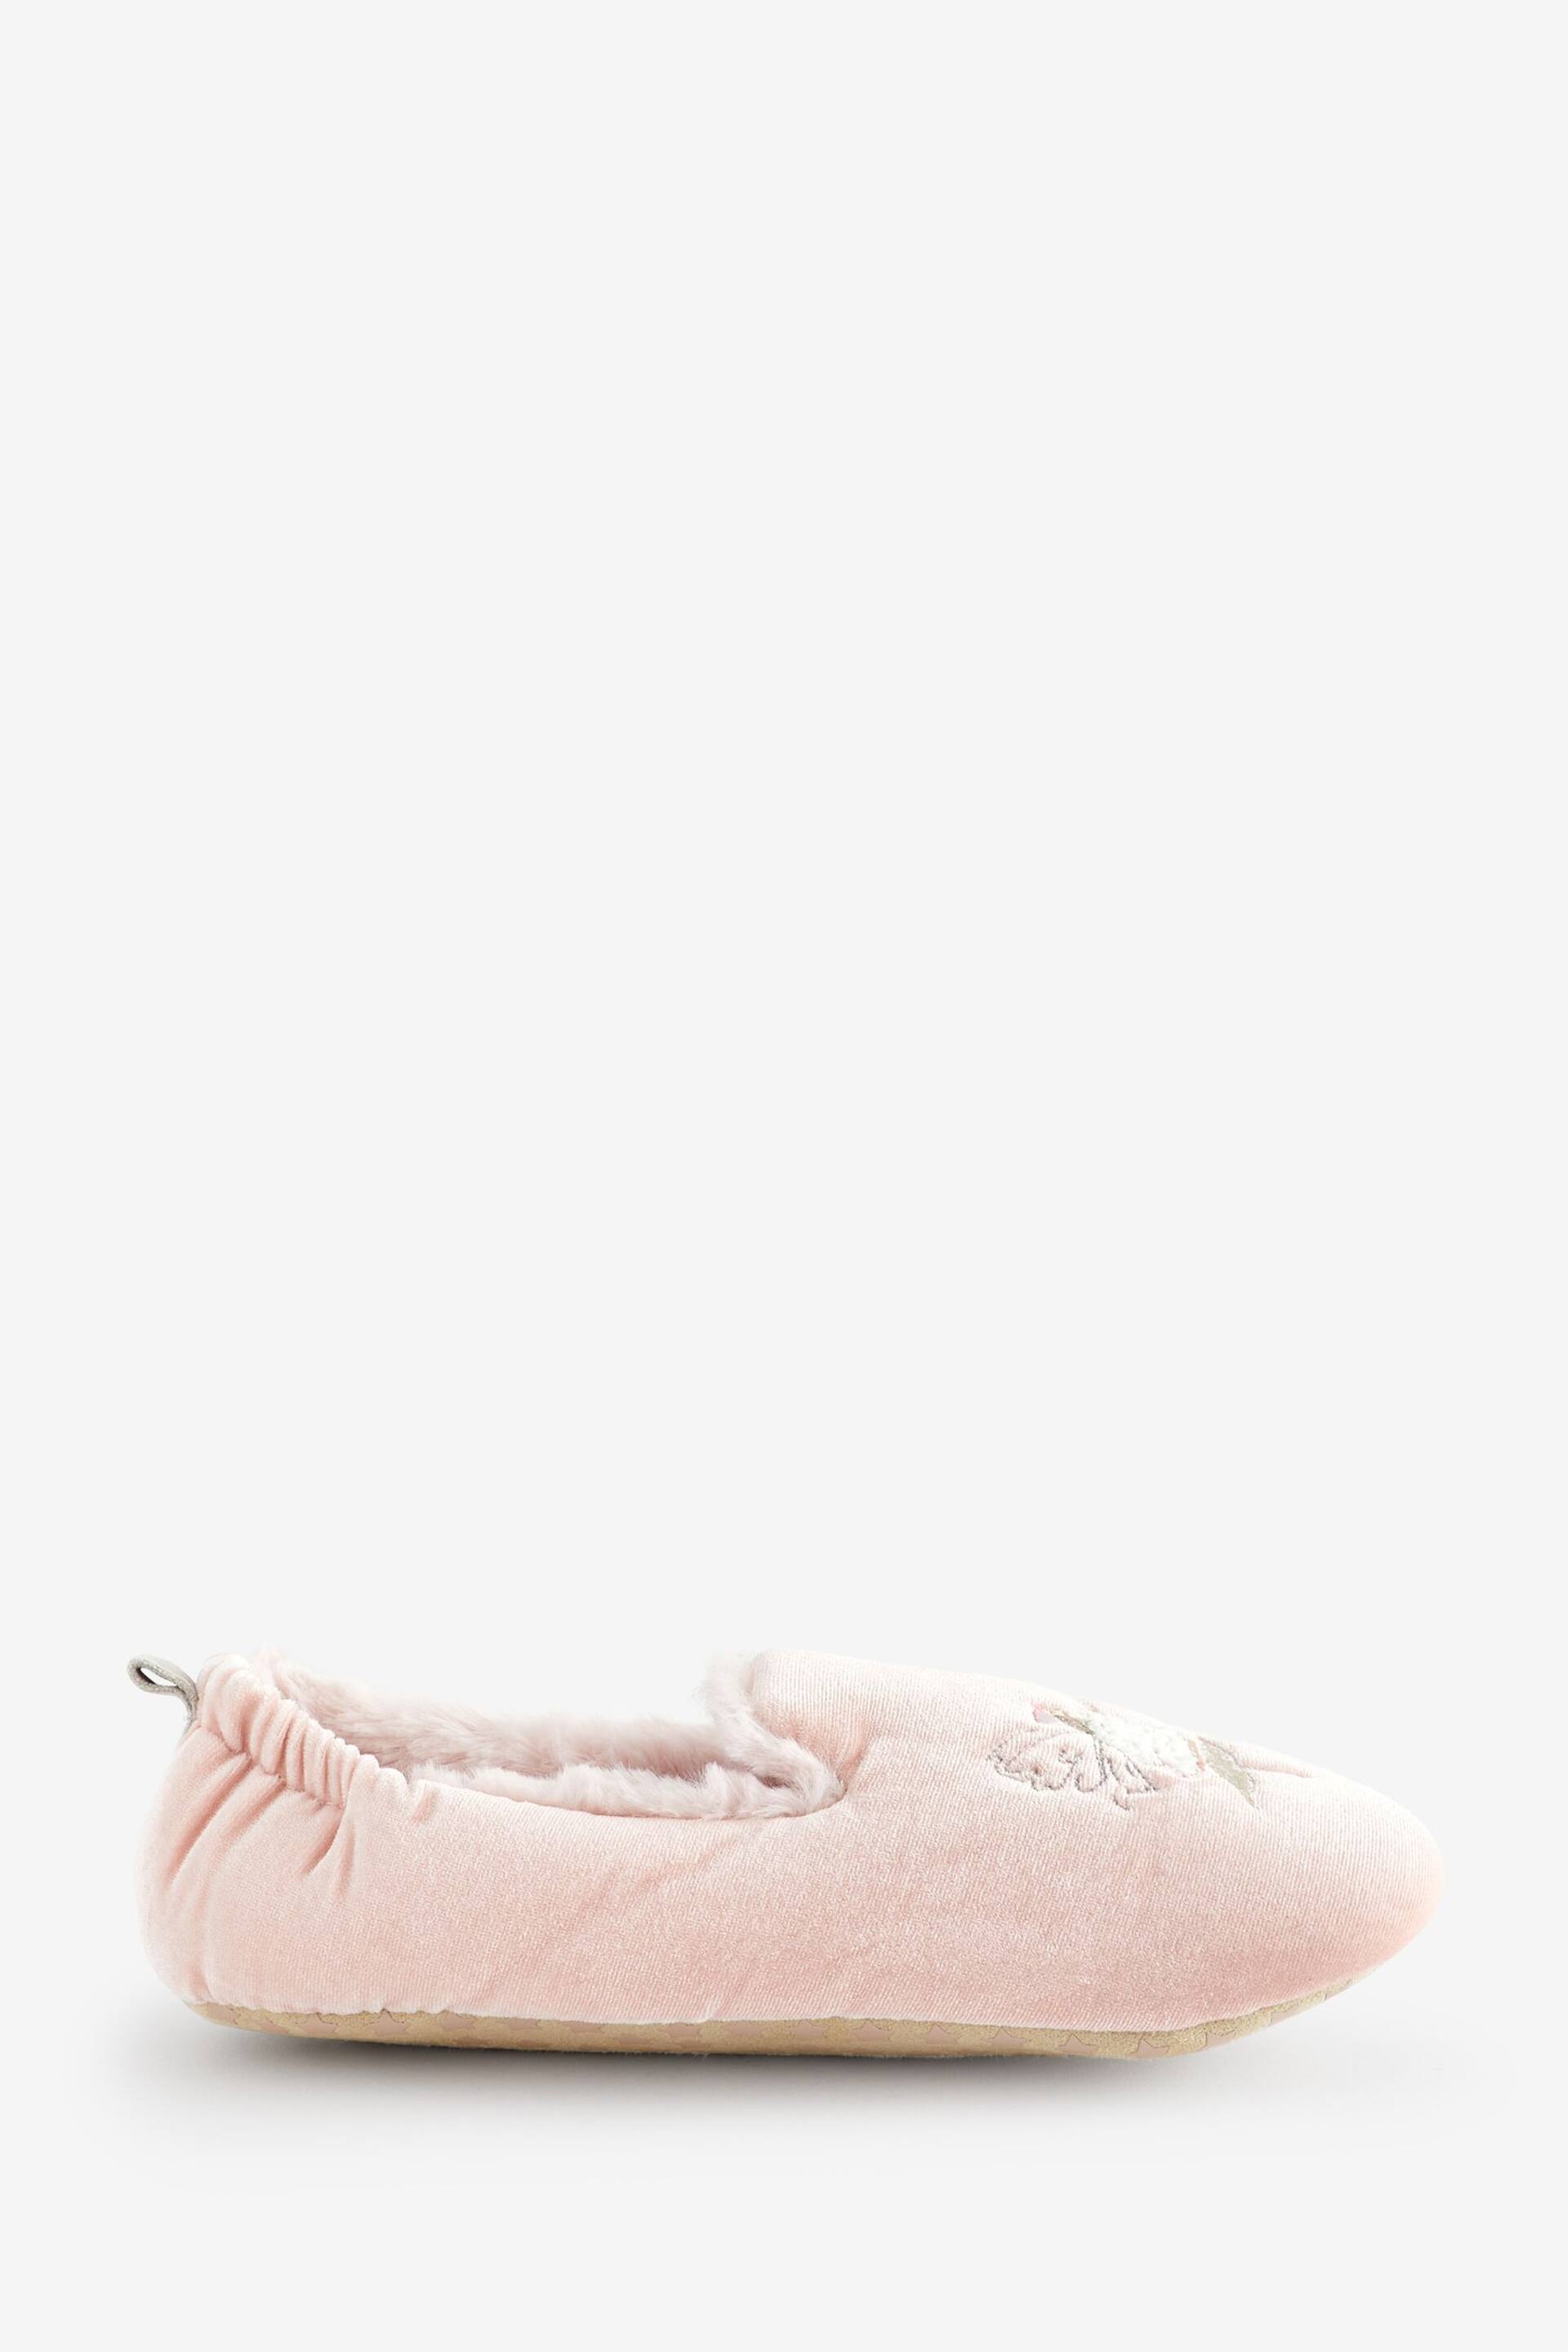 The White Company Pink Fairy Slippers - Image 1 of 1